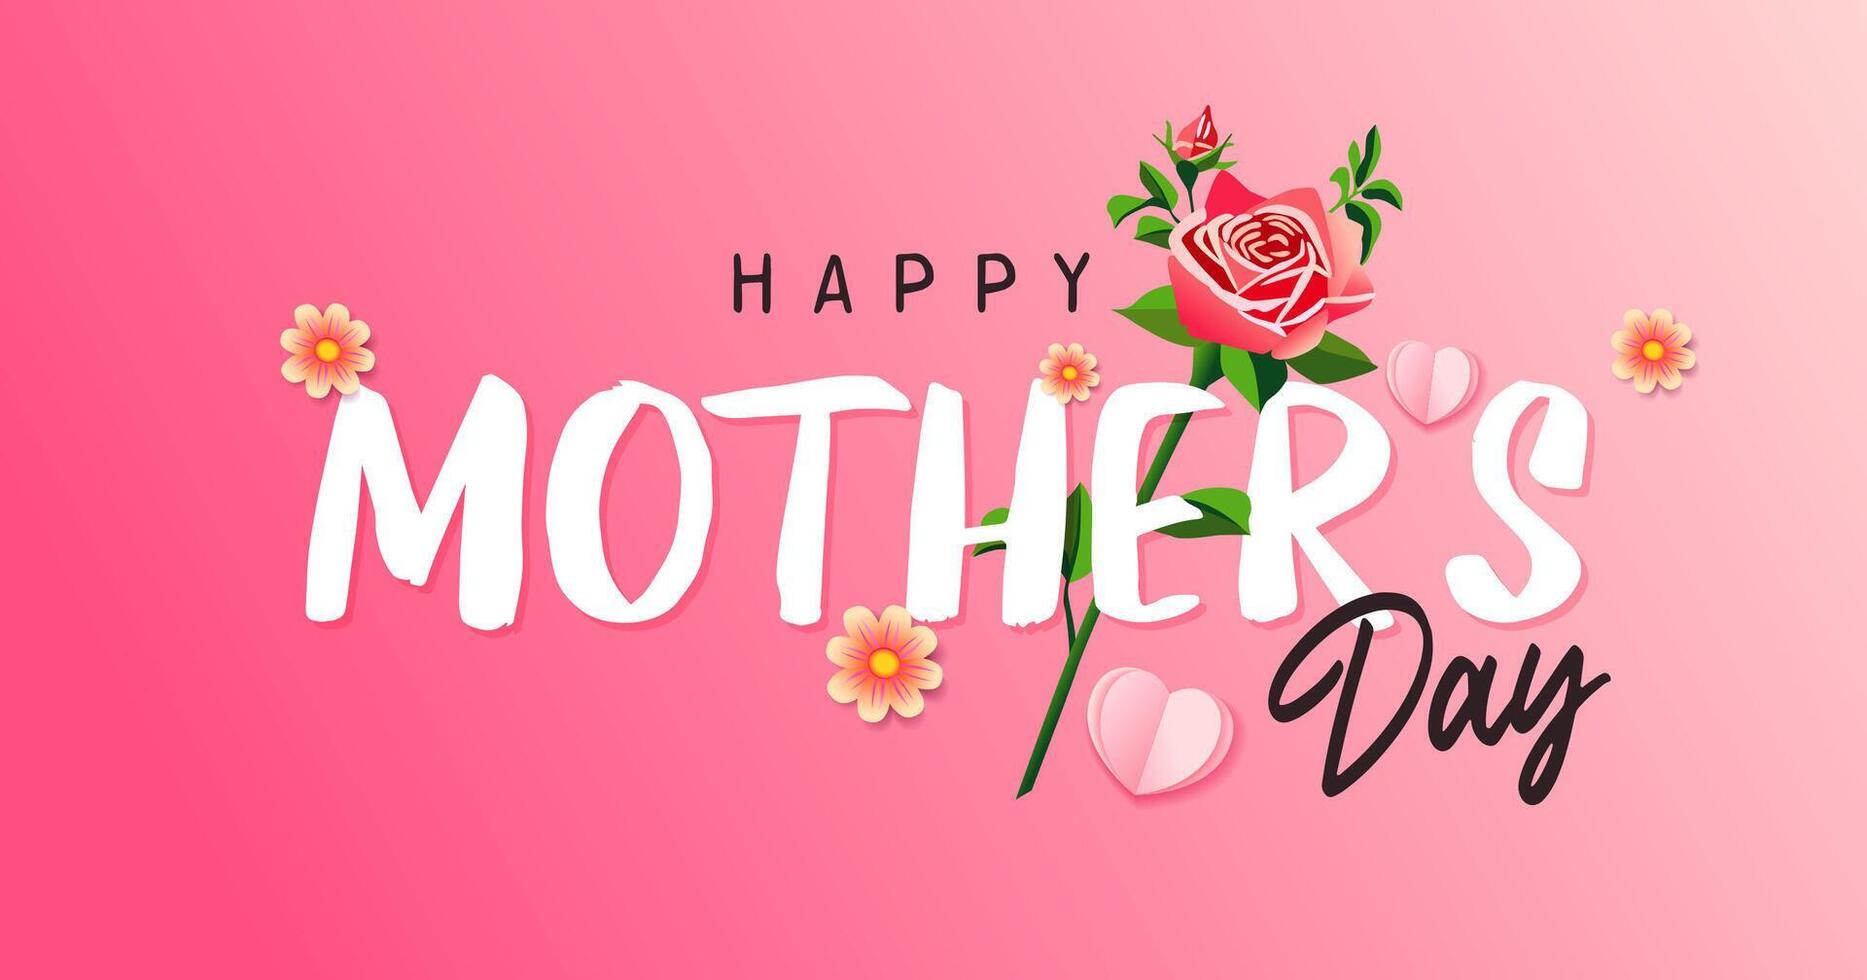 Happy Mother's day greeting card design. Postcard concept vector